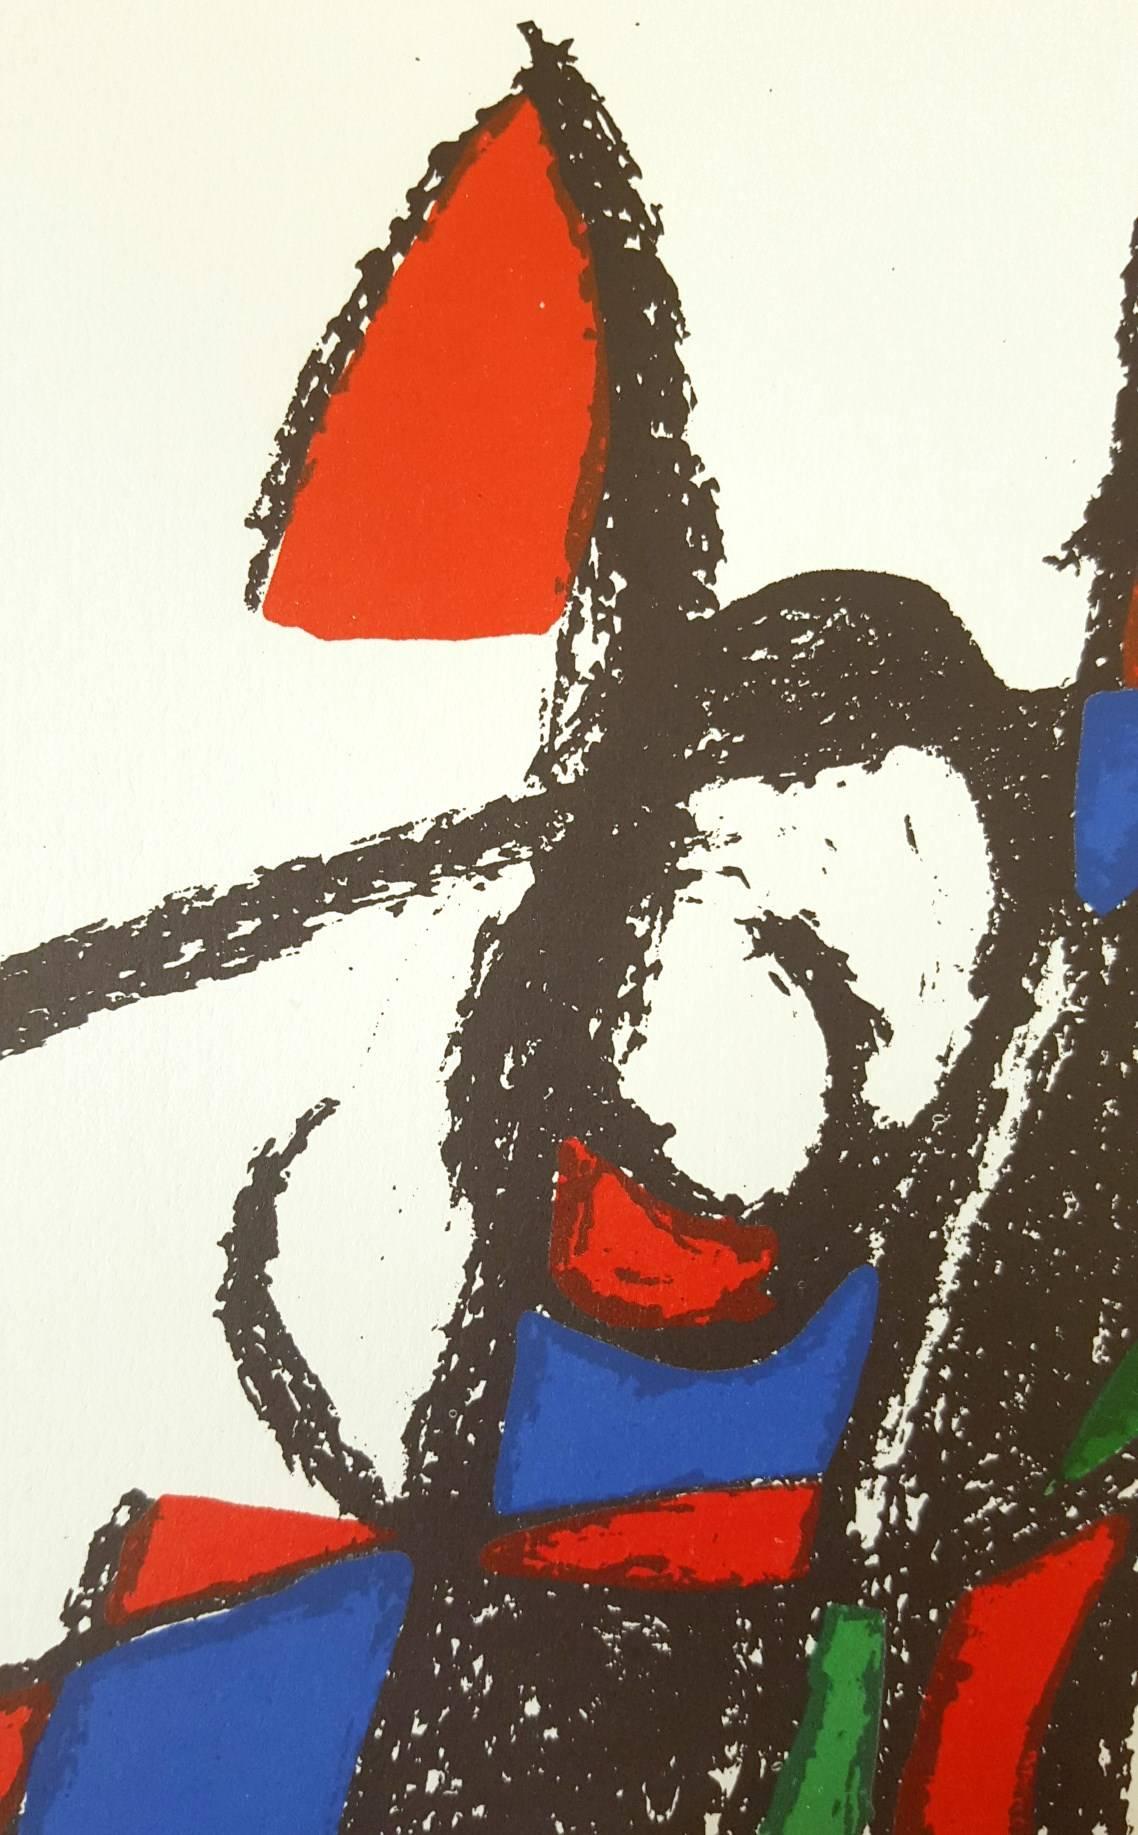 Lithographe II: Untitled (M. 1038). Original color lithograph, 1975. Limited edition of 5,000 for volume II of the catalogue raisonné of Miro's lithographs. Our impression is unsigned. Sheet size: 12.5